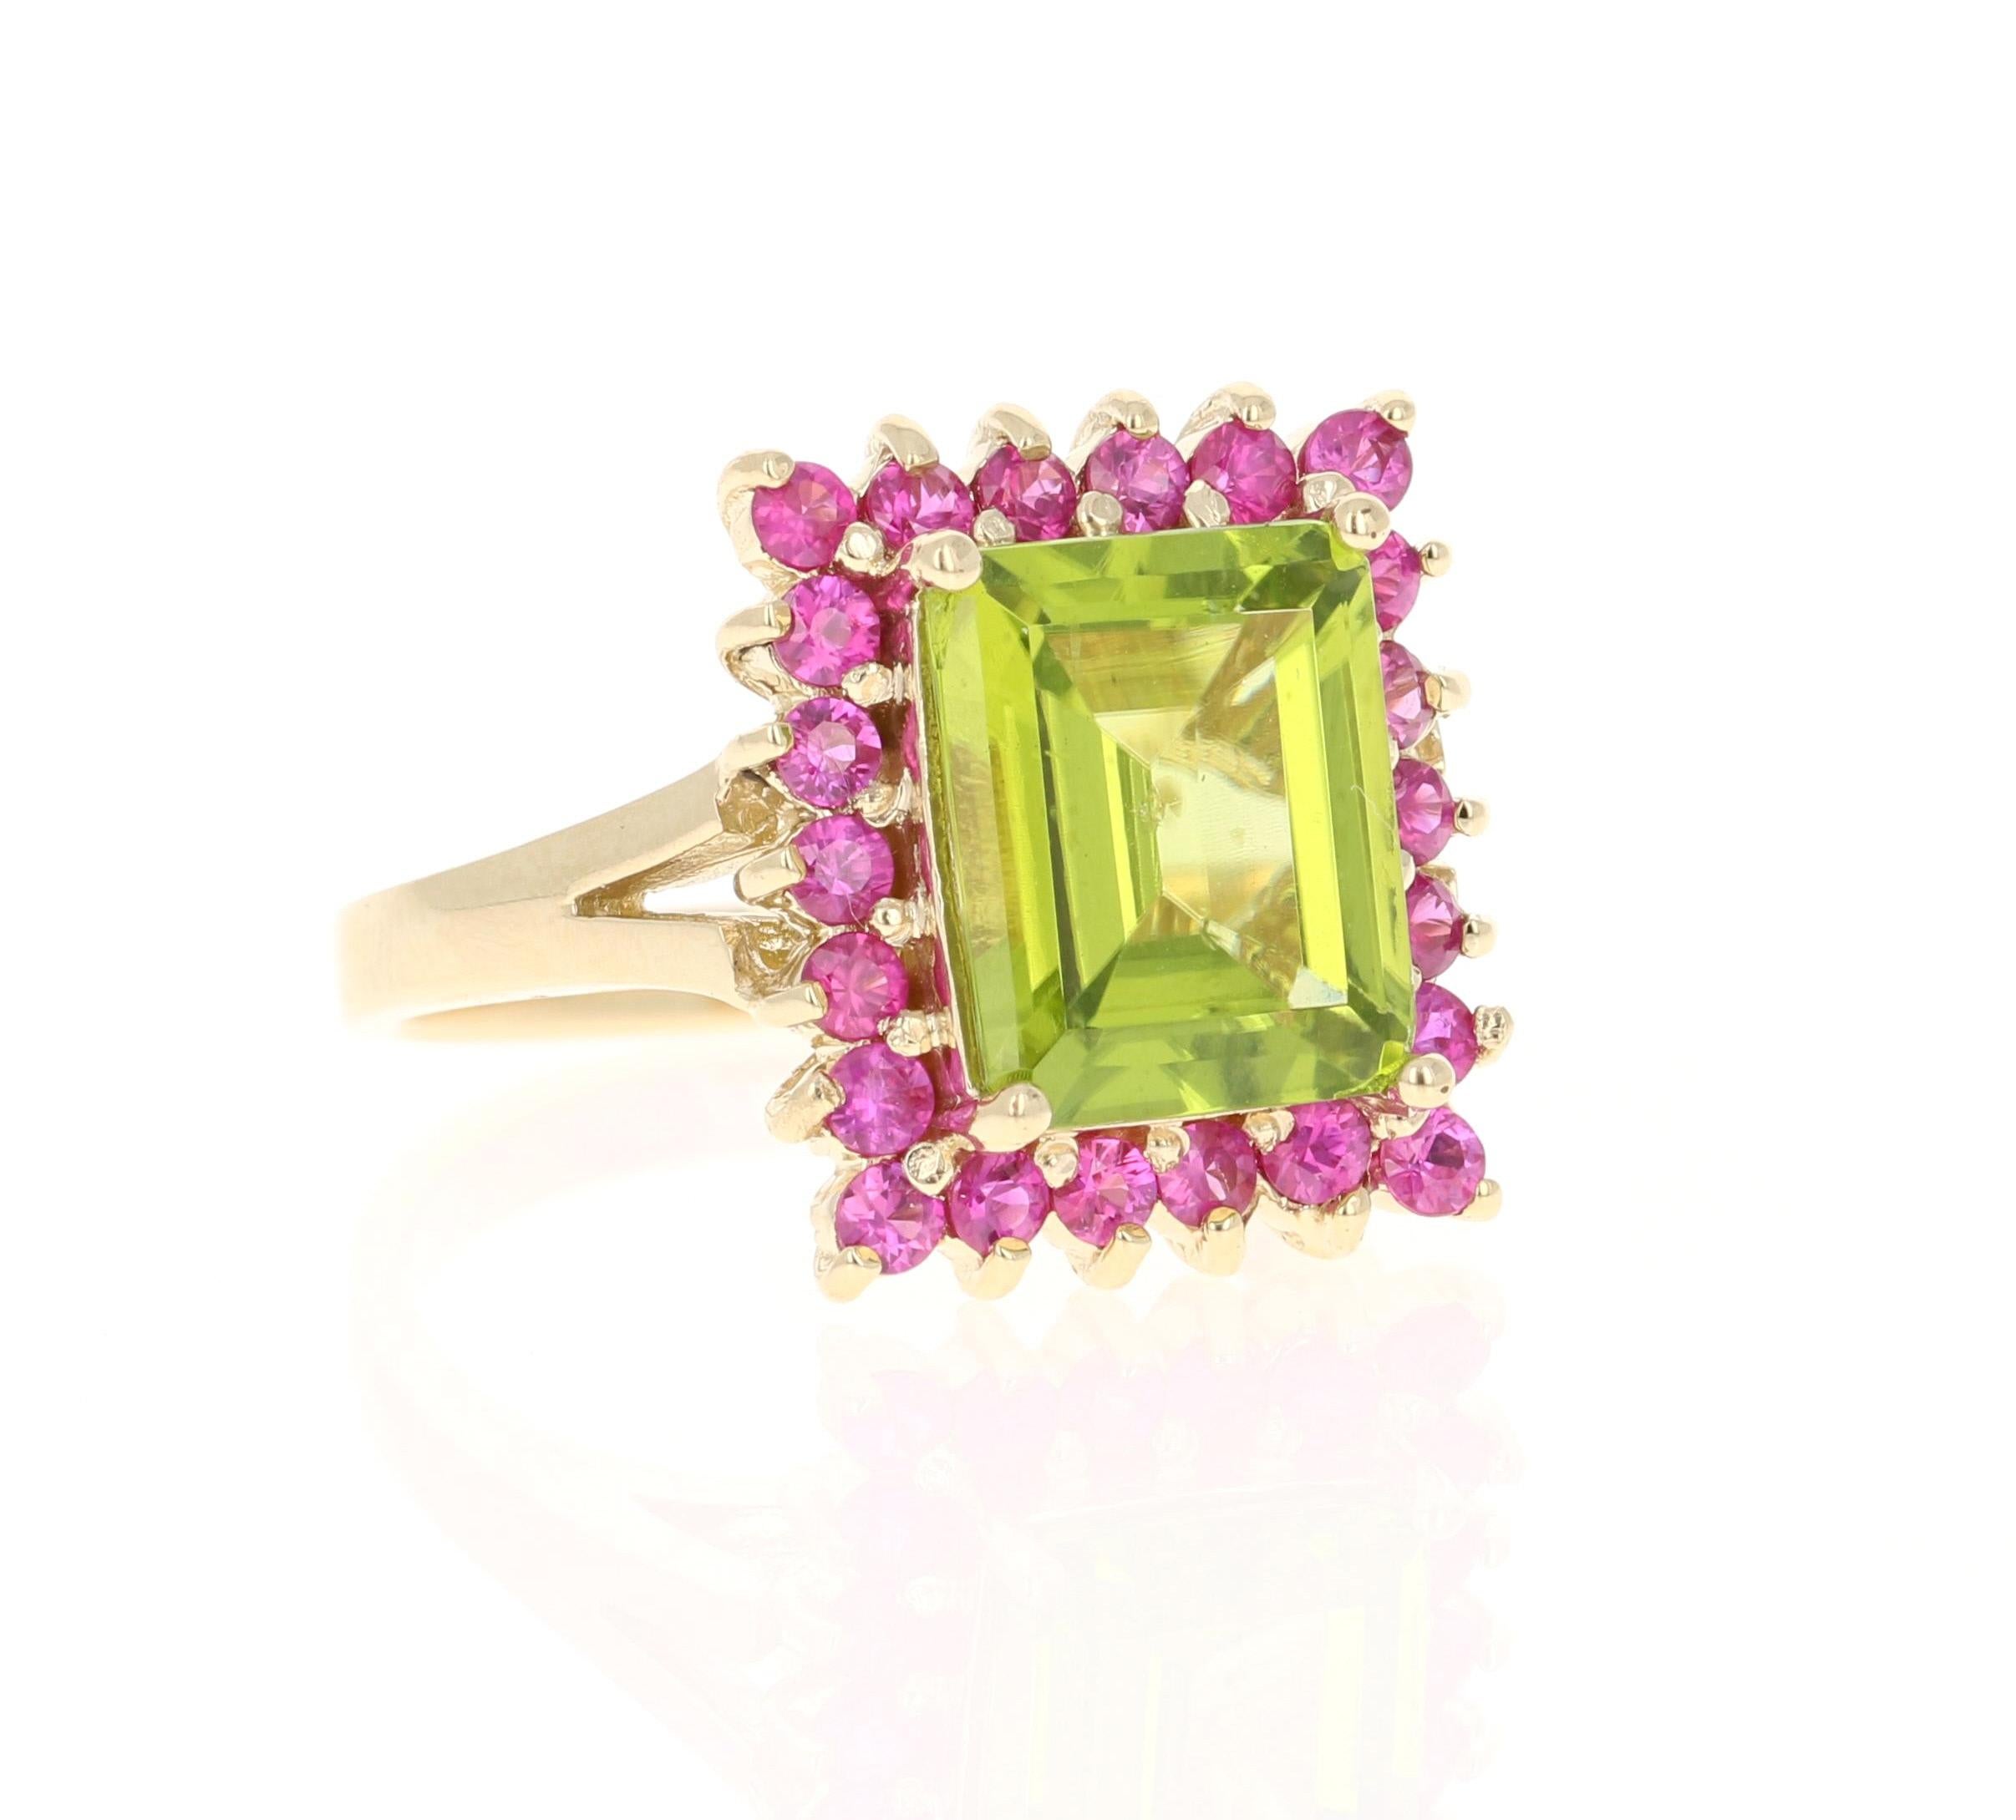 This ring has a 4.14 carat Peridot and 22 Pink Sapphires that weigh 0.96 Carats. The total carat weight of the ring is 5.10 Carats. 
Curated in 14 Karat Yellow Gold and weighs approximately 6.8 grams. 

The ring size is 7 and can be re-sized if